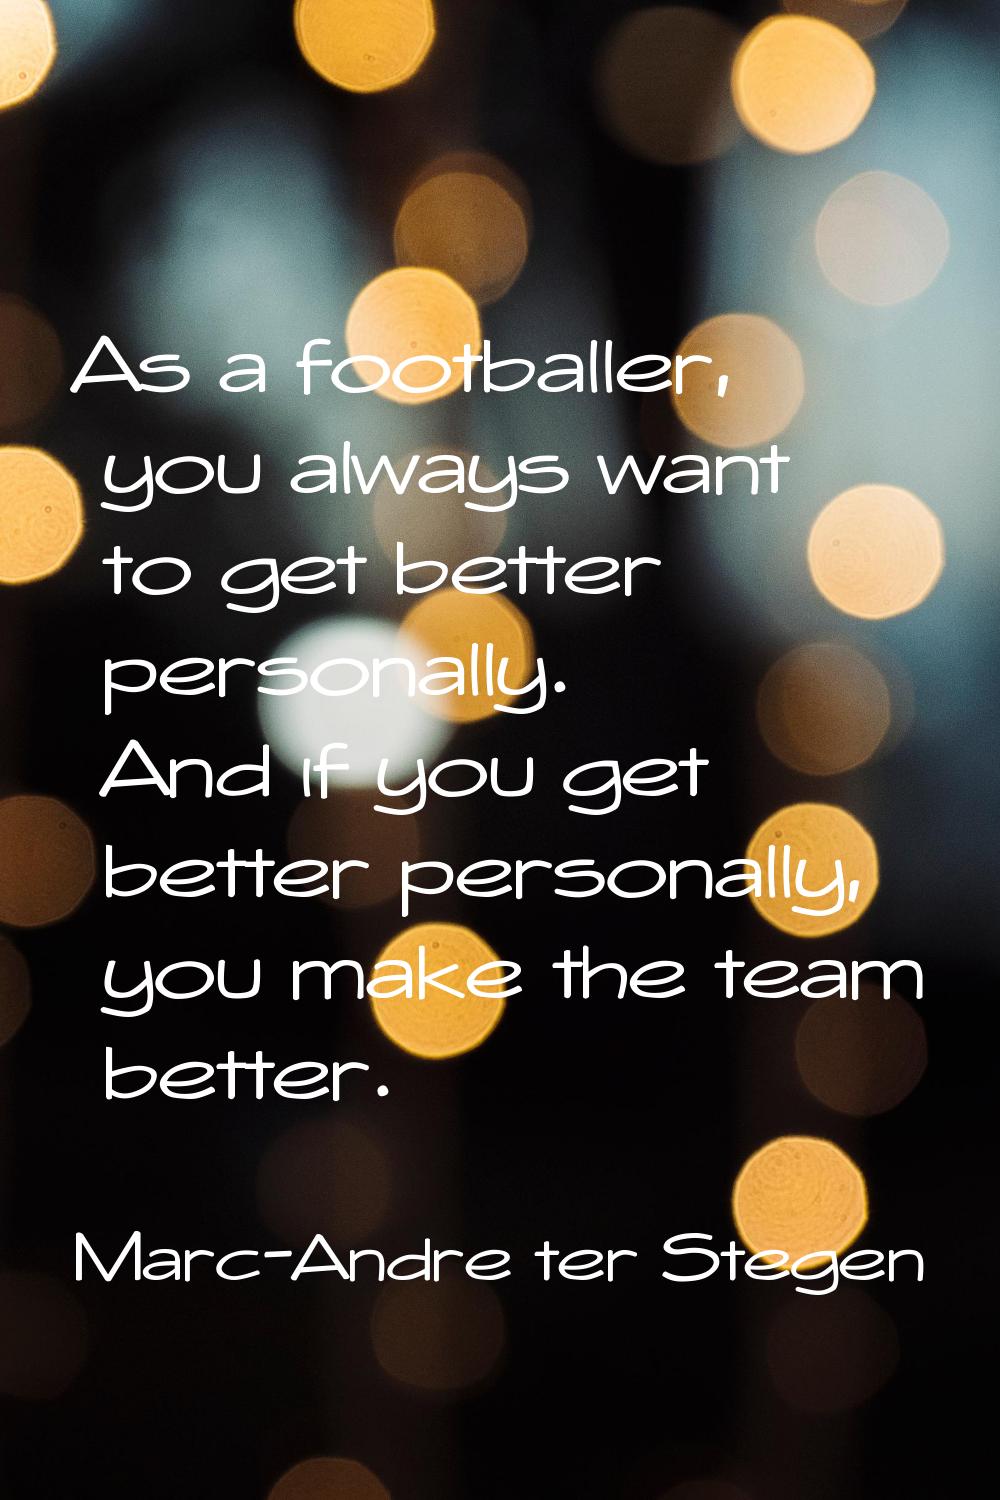 As a footballer, you always want to get better personally. And if you get better personally, you ma